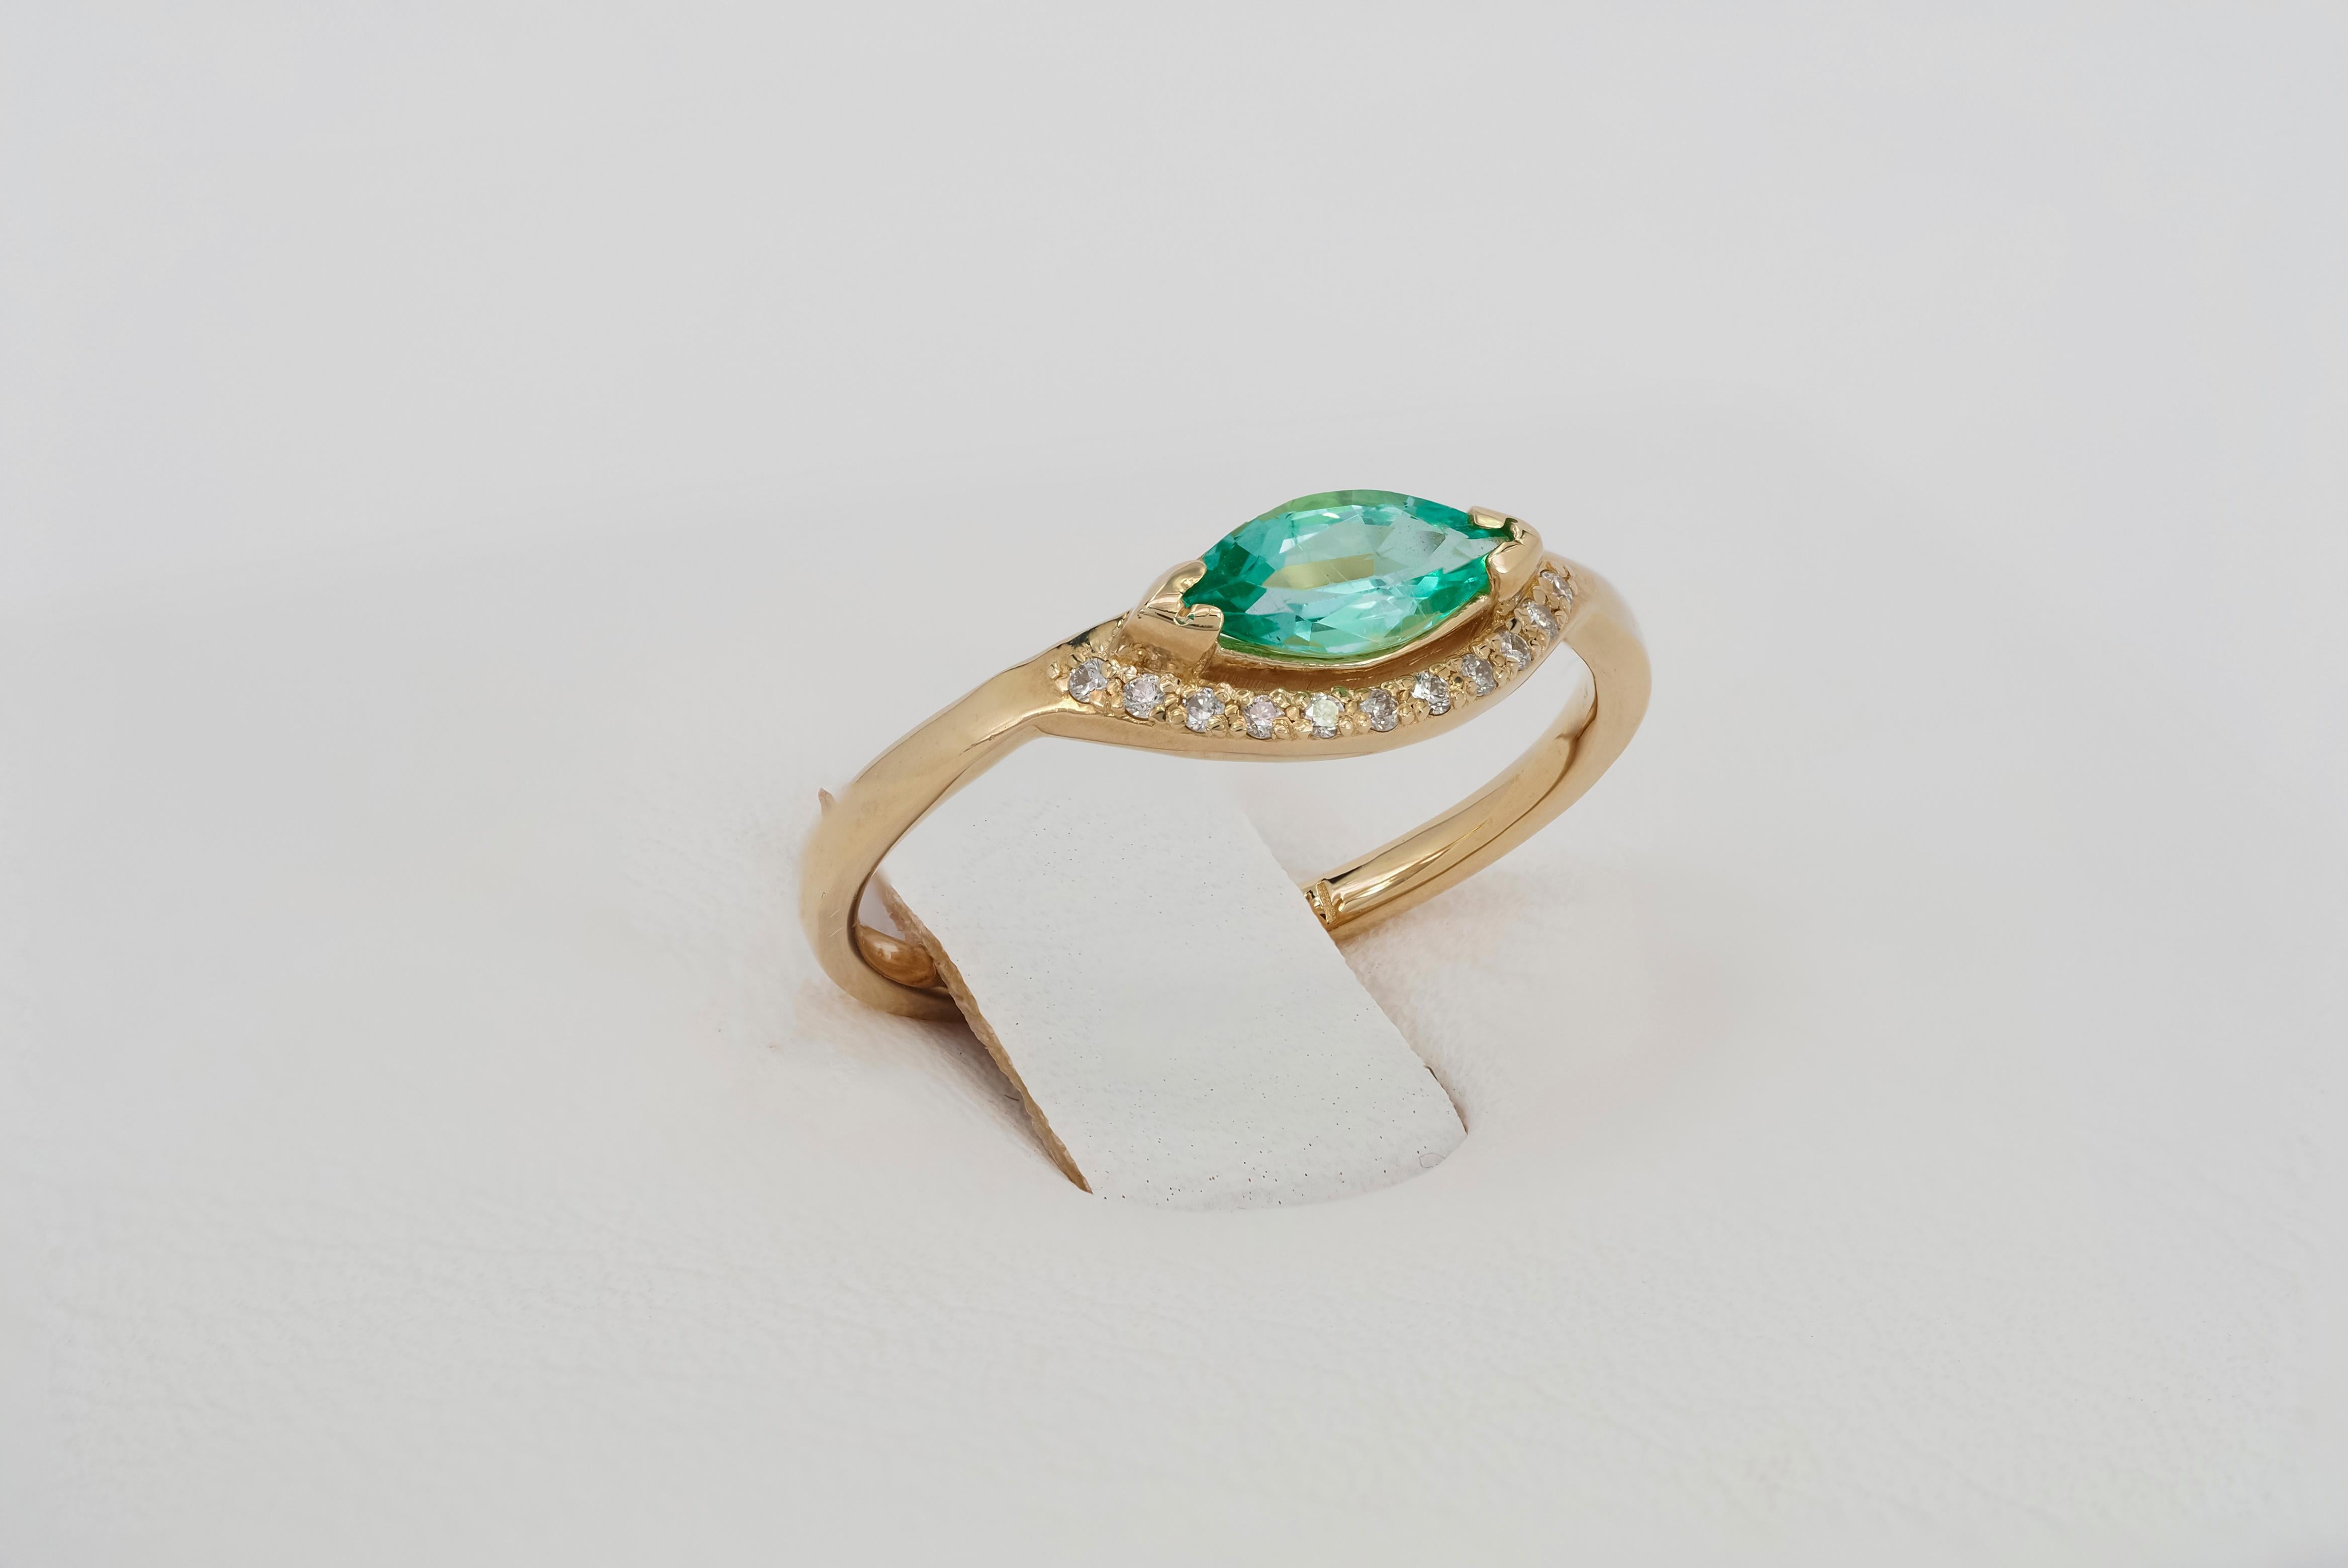 For Sale:  14 K Gold Ring with Marquise Cut Emerald and Diamonds 6